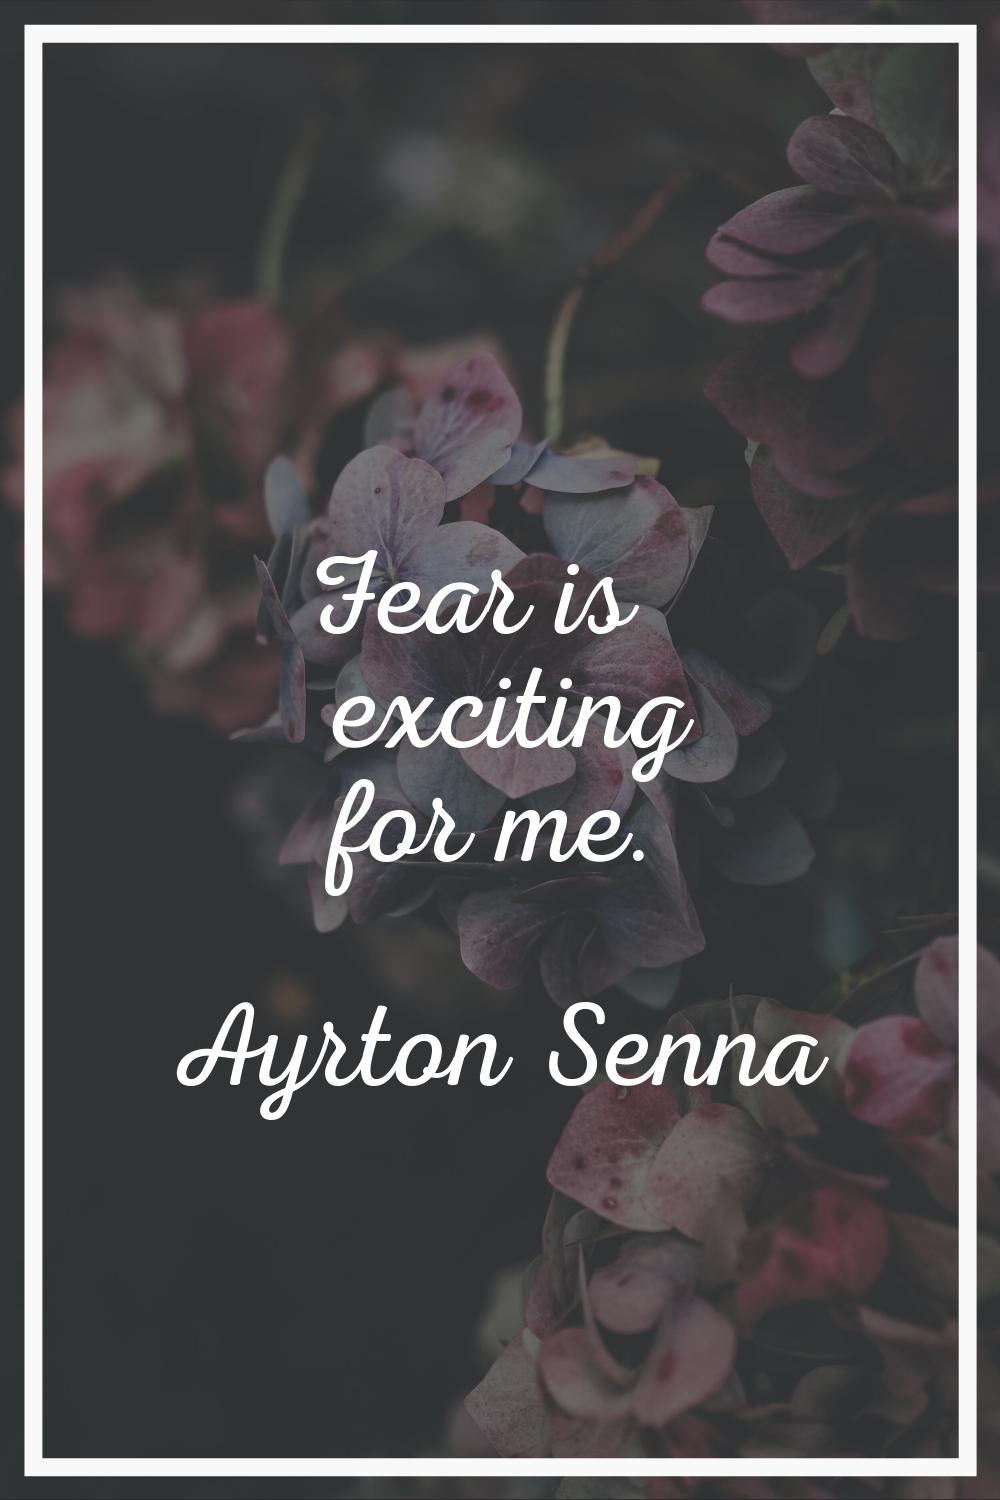 Fear is exciting for me.